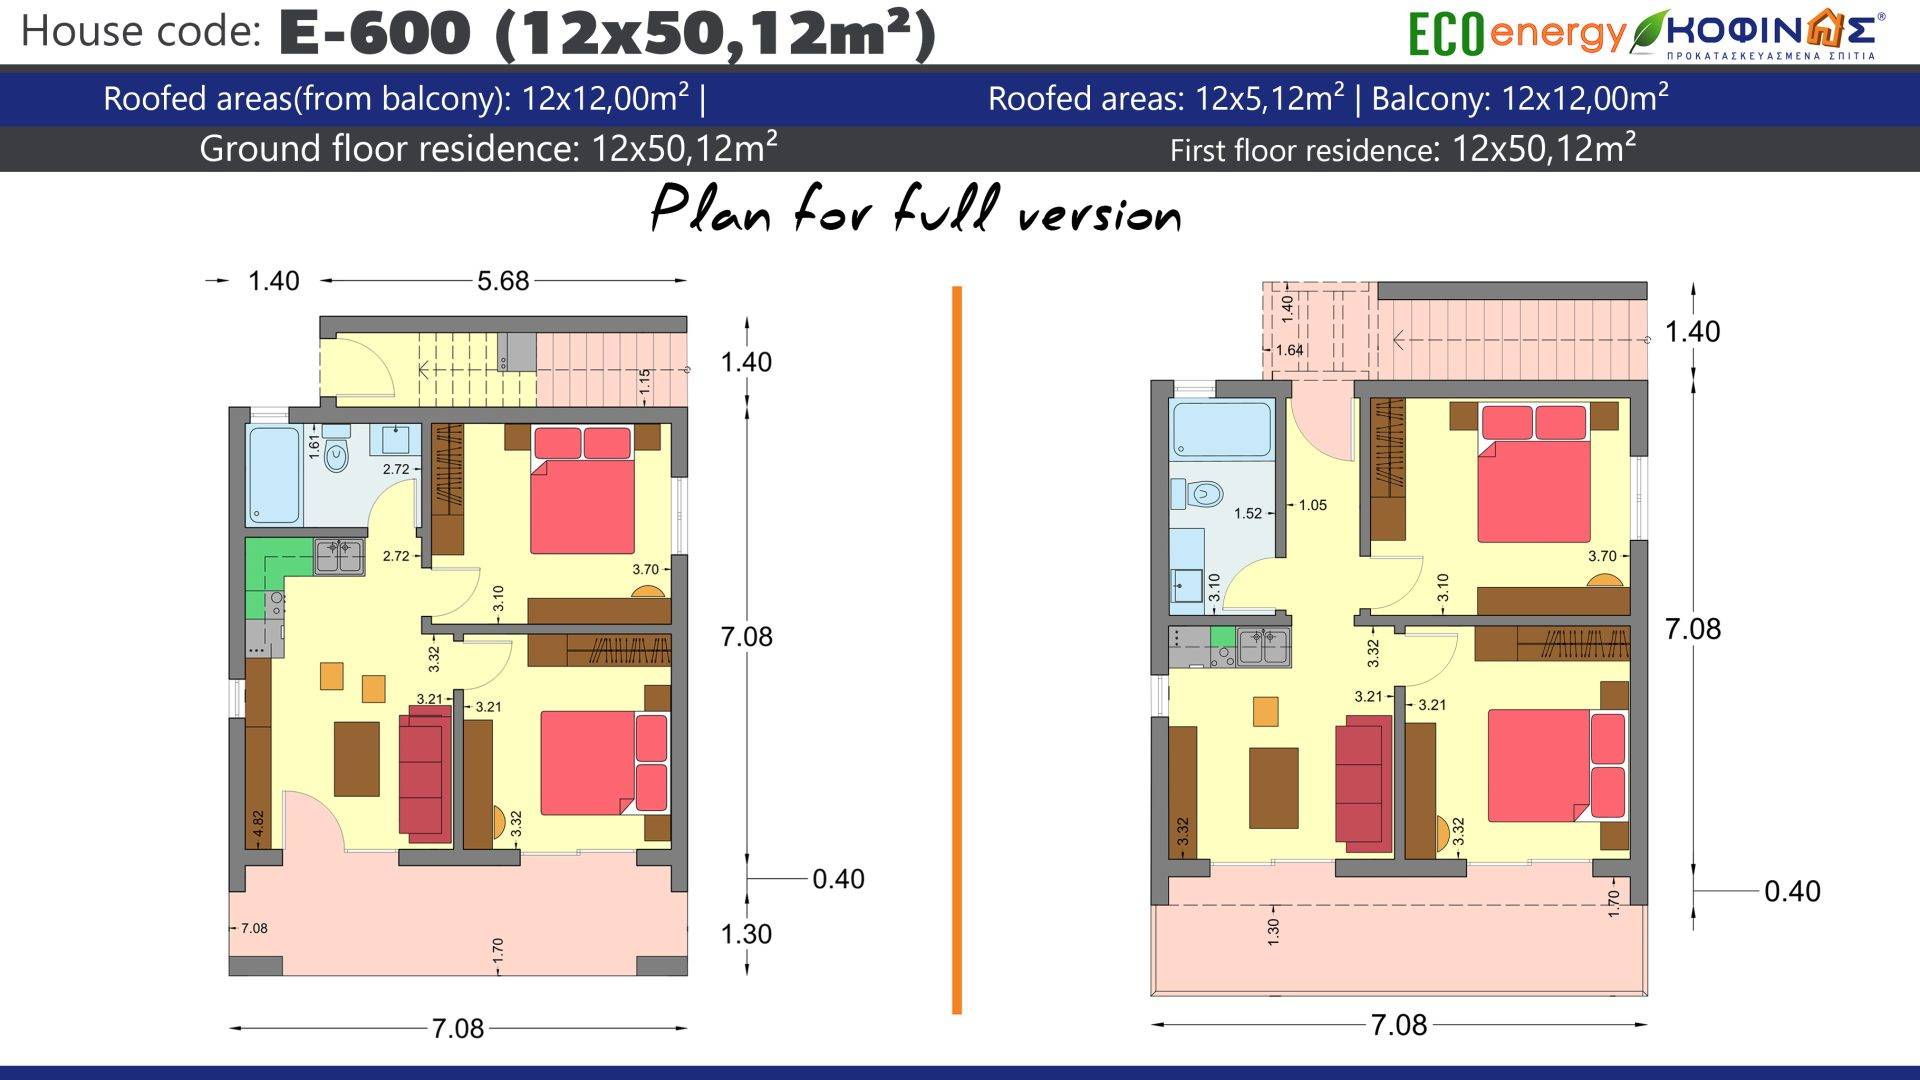 House complex E-600, total surface of 12 x 50,12 = 601,44 m²,covered areas 30,80 m², balconies 72,00 m²